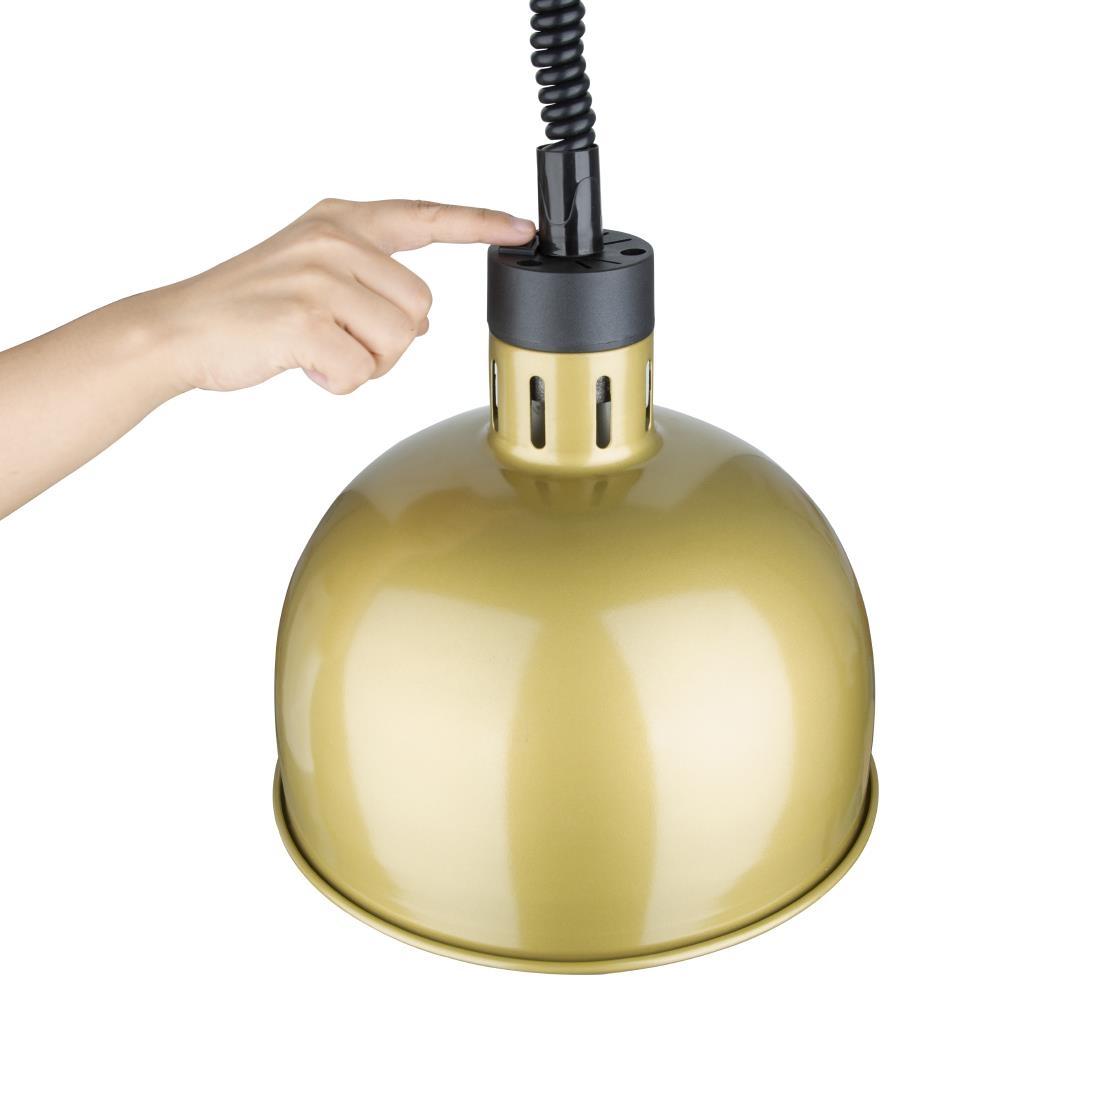 Buffalo Retractable Dome Heat Shade Pale Gold Finish - DY462  - 5